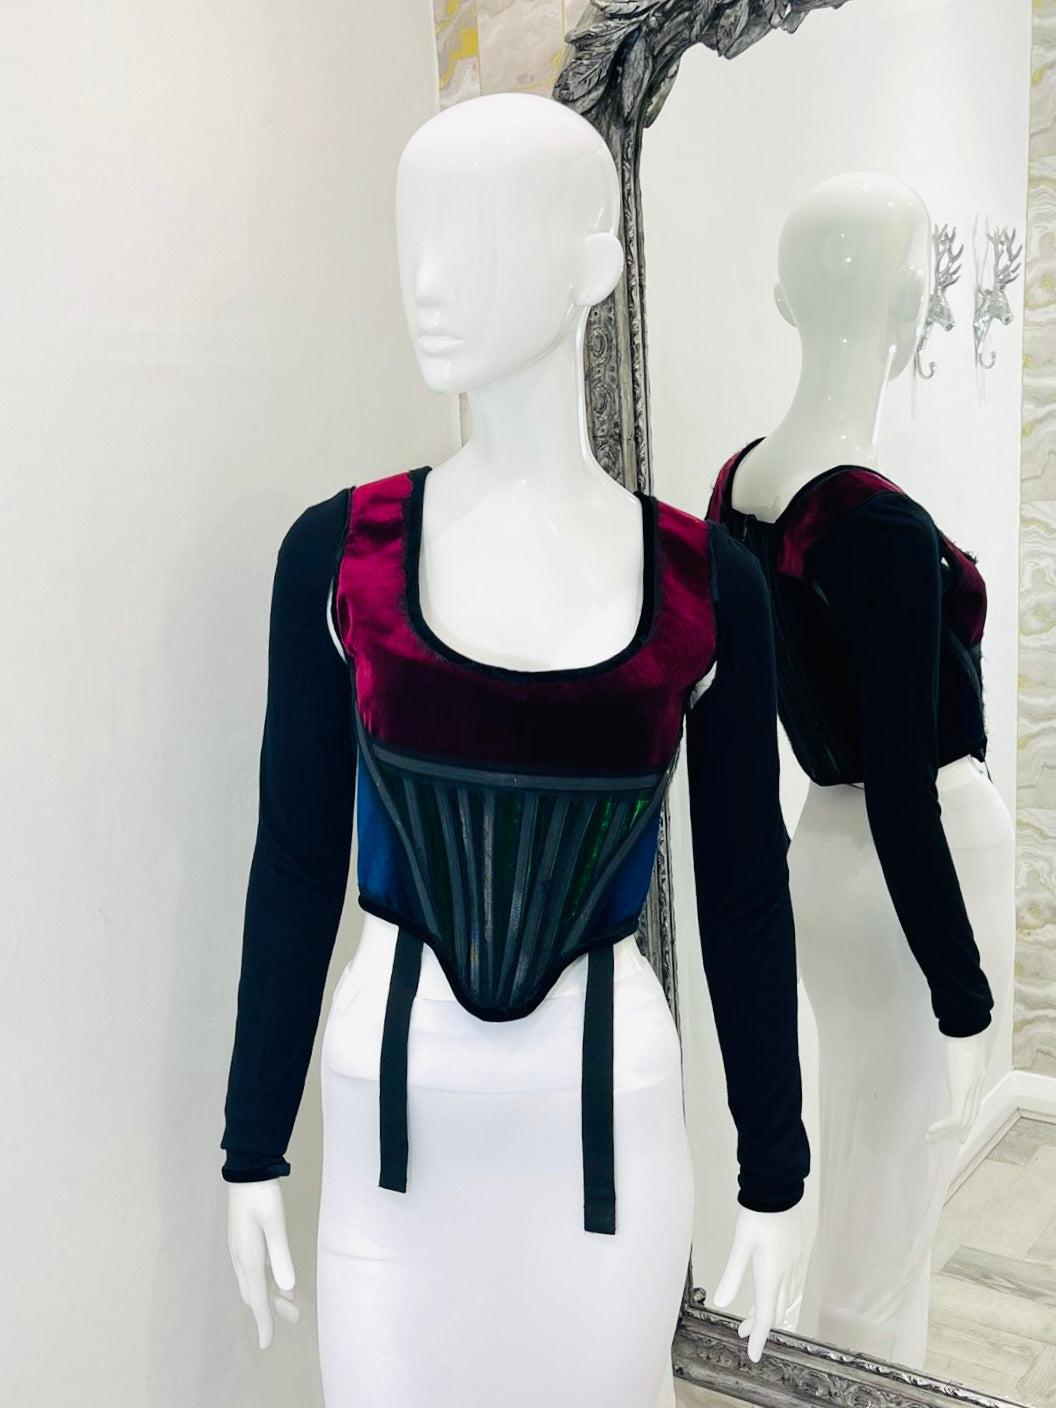 Givenchy Velvet Trim Corset

Black fringed/raw edged with bright red and dark green velvet detailing. Long Sleeves with cut out areas to arms. From 2013 runway collection. Rare item.

Additional information:
Size – 40FR
Composition- Velvet, 25%